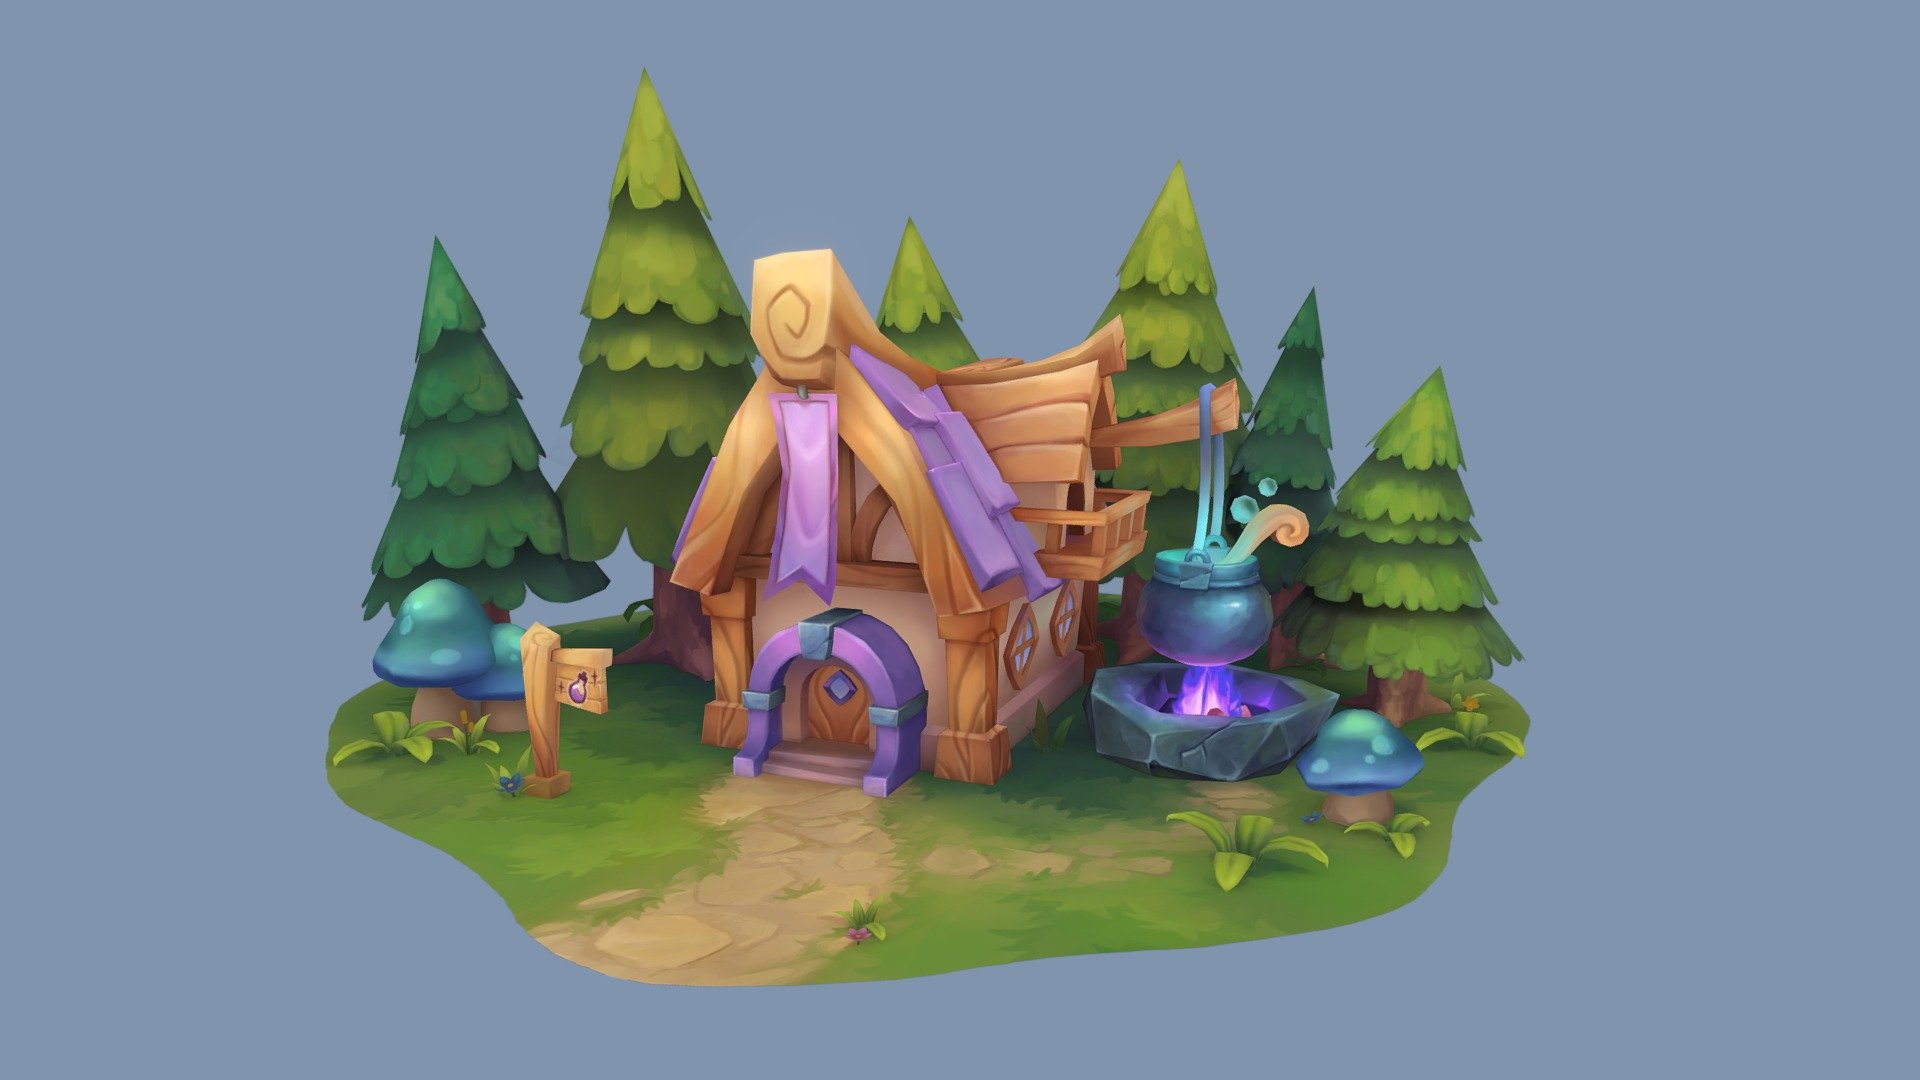 A little hand painted diorama of an alchemist's house that I did. I wanted to create a stylised and quirky home tucked away in a cosy little forest. Had a lot of fun texturing this piece and learnt a lot during the process. 

The design of the house is based off a concept of my own. 

Modeled in Blender then textured in 3DCoat and Photoshop 3d model